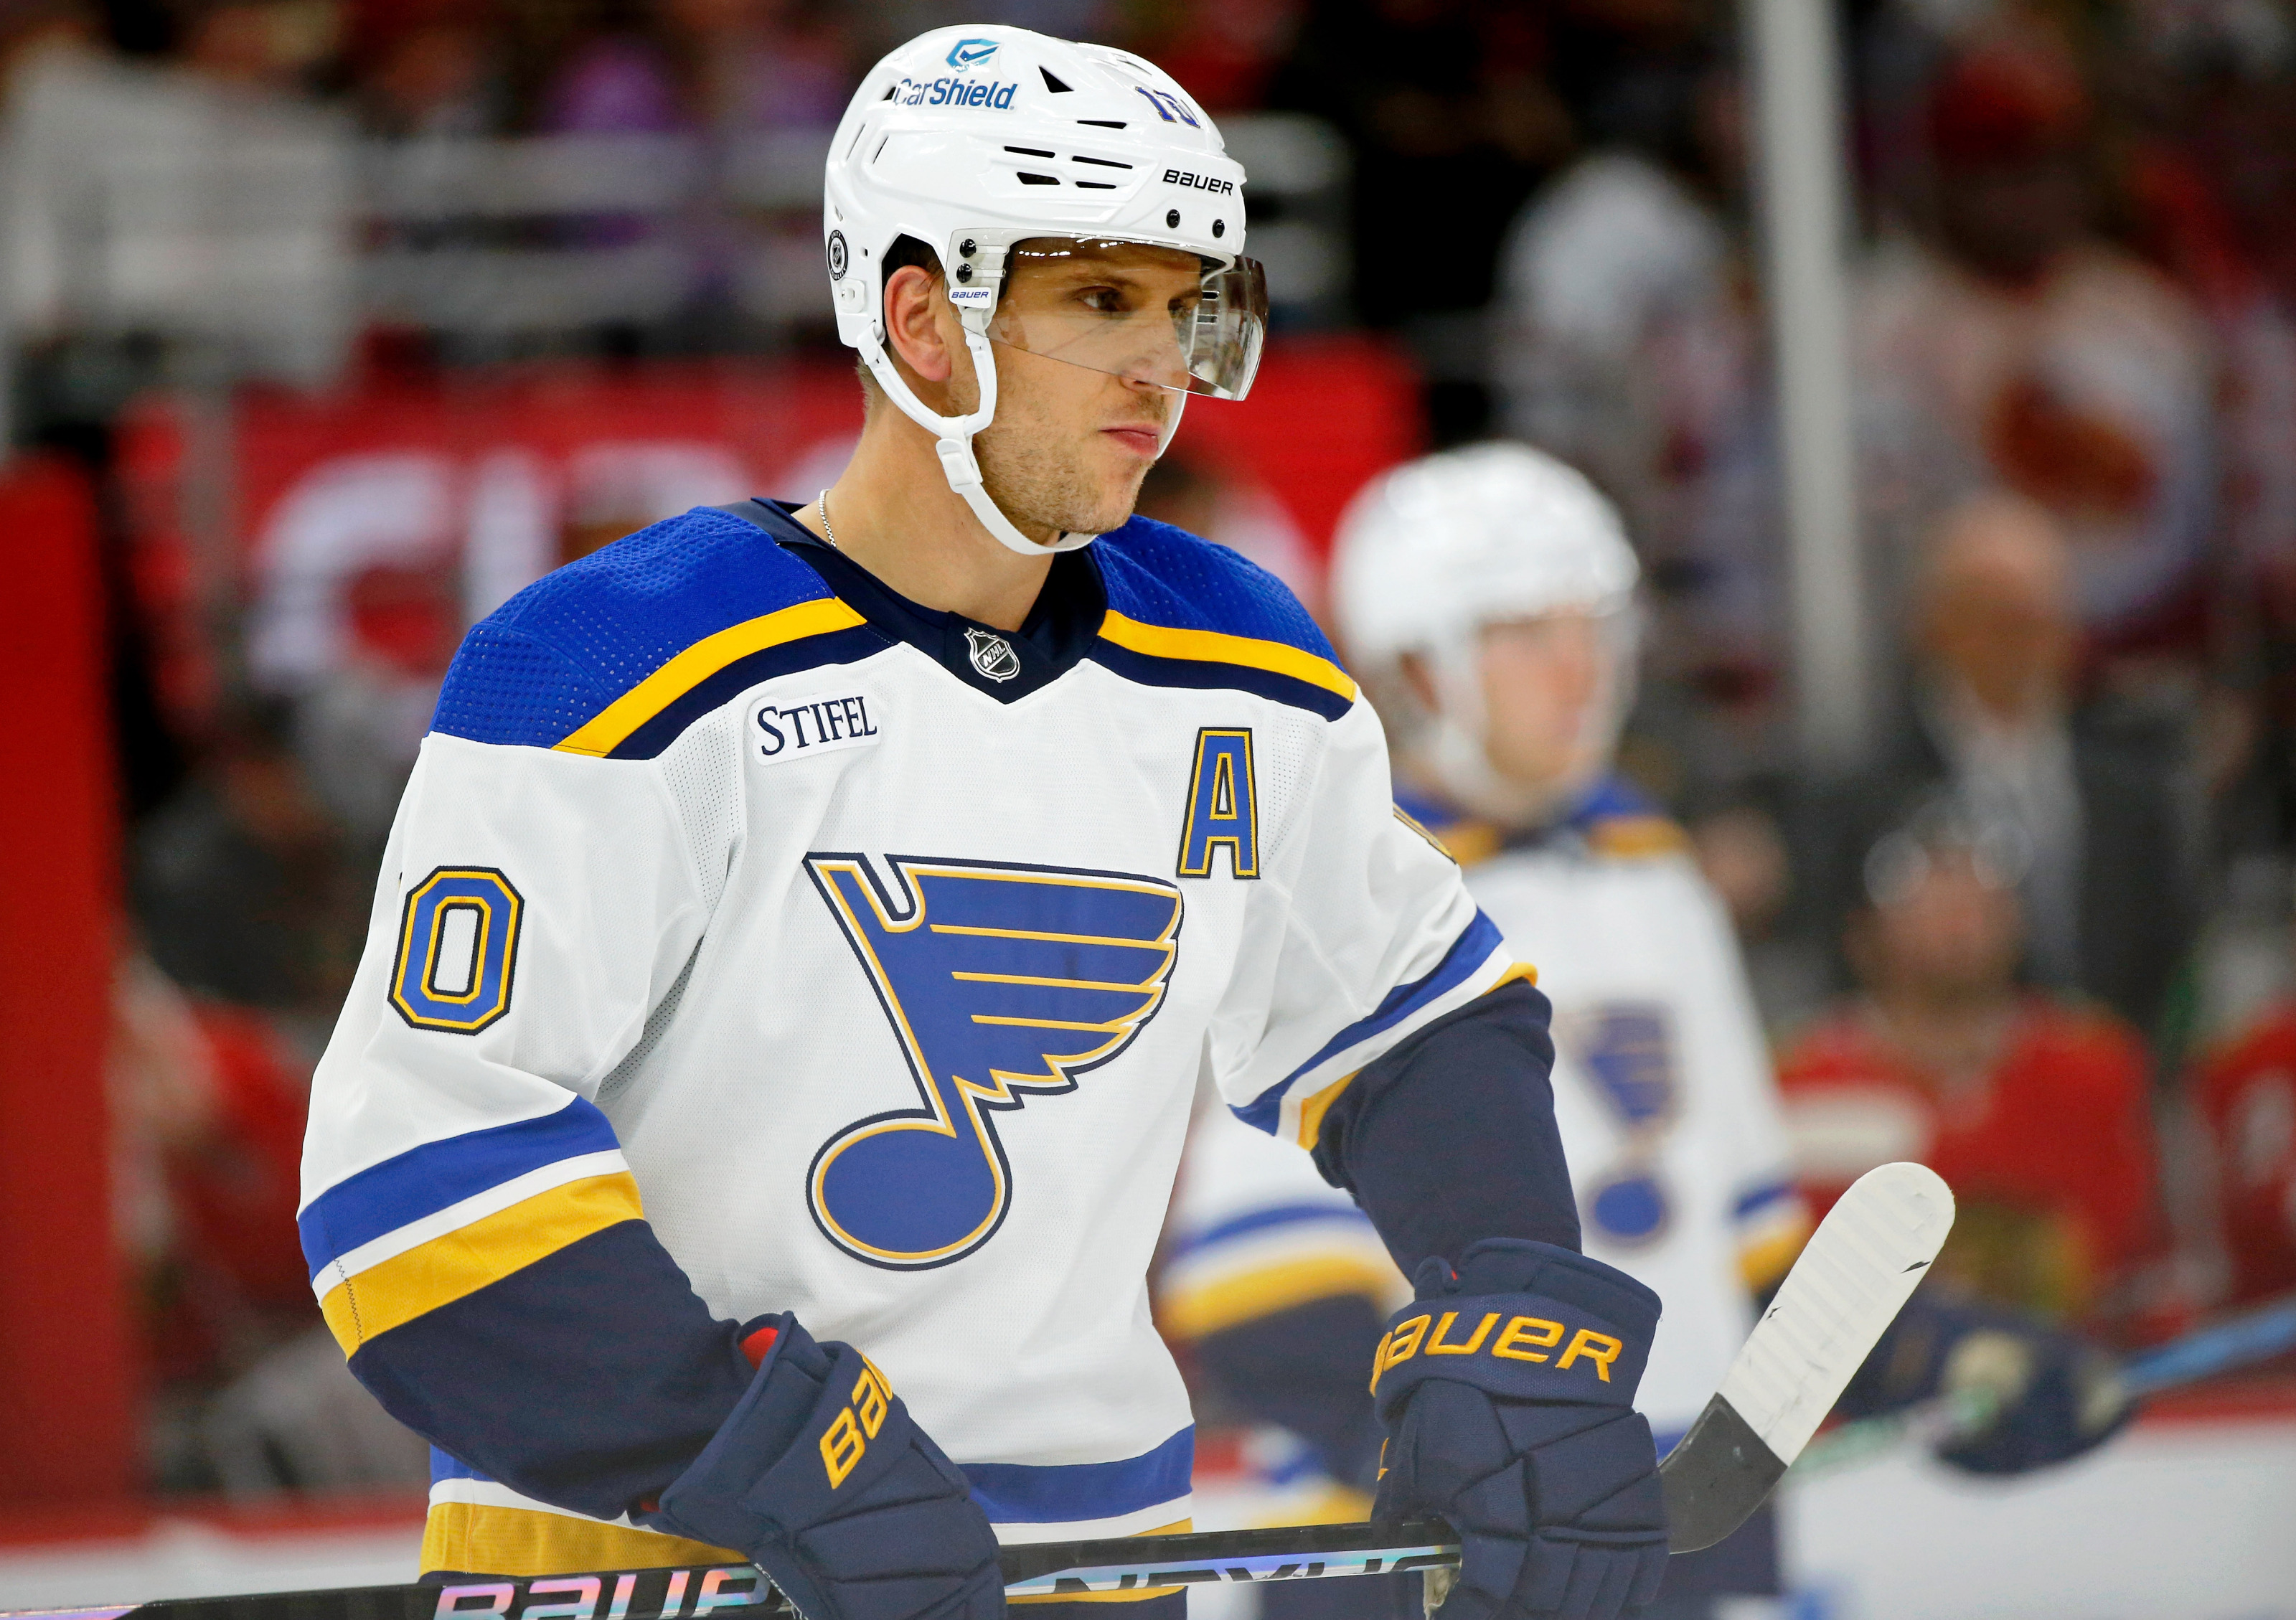 Brayden Schenn named 24th captain of St. Louis Blues - Daily Faceoff